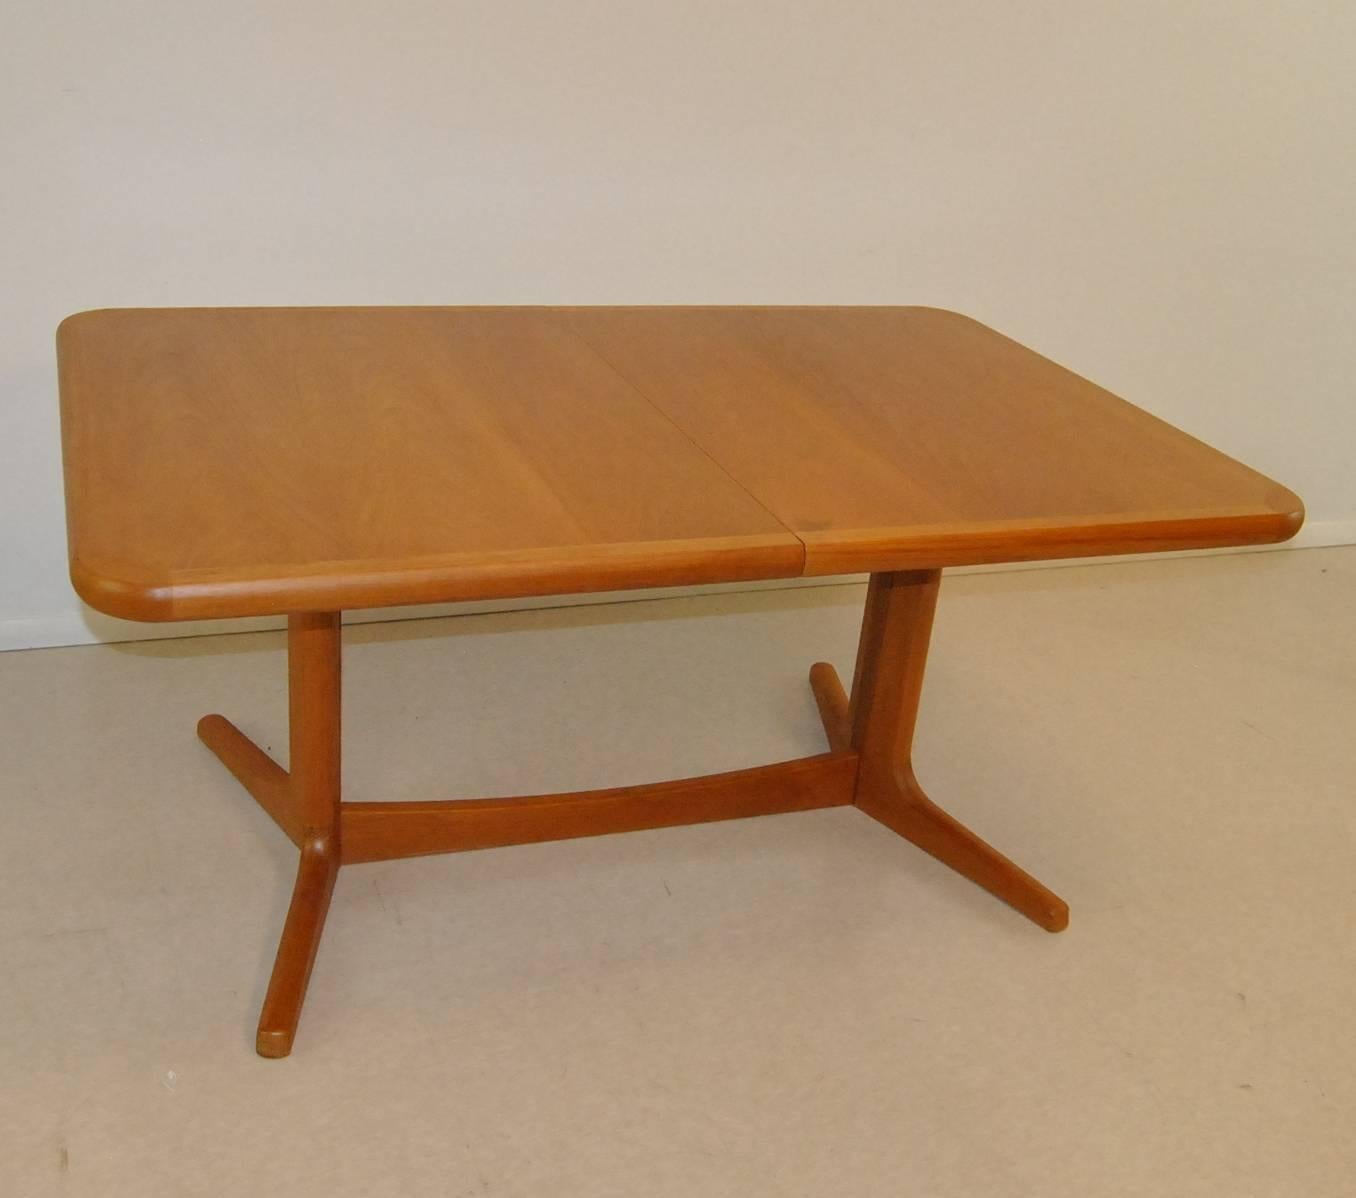 A great teak dining set. Set includes a 63" by 40.75